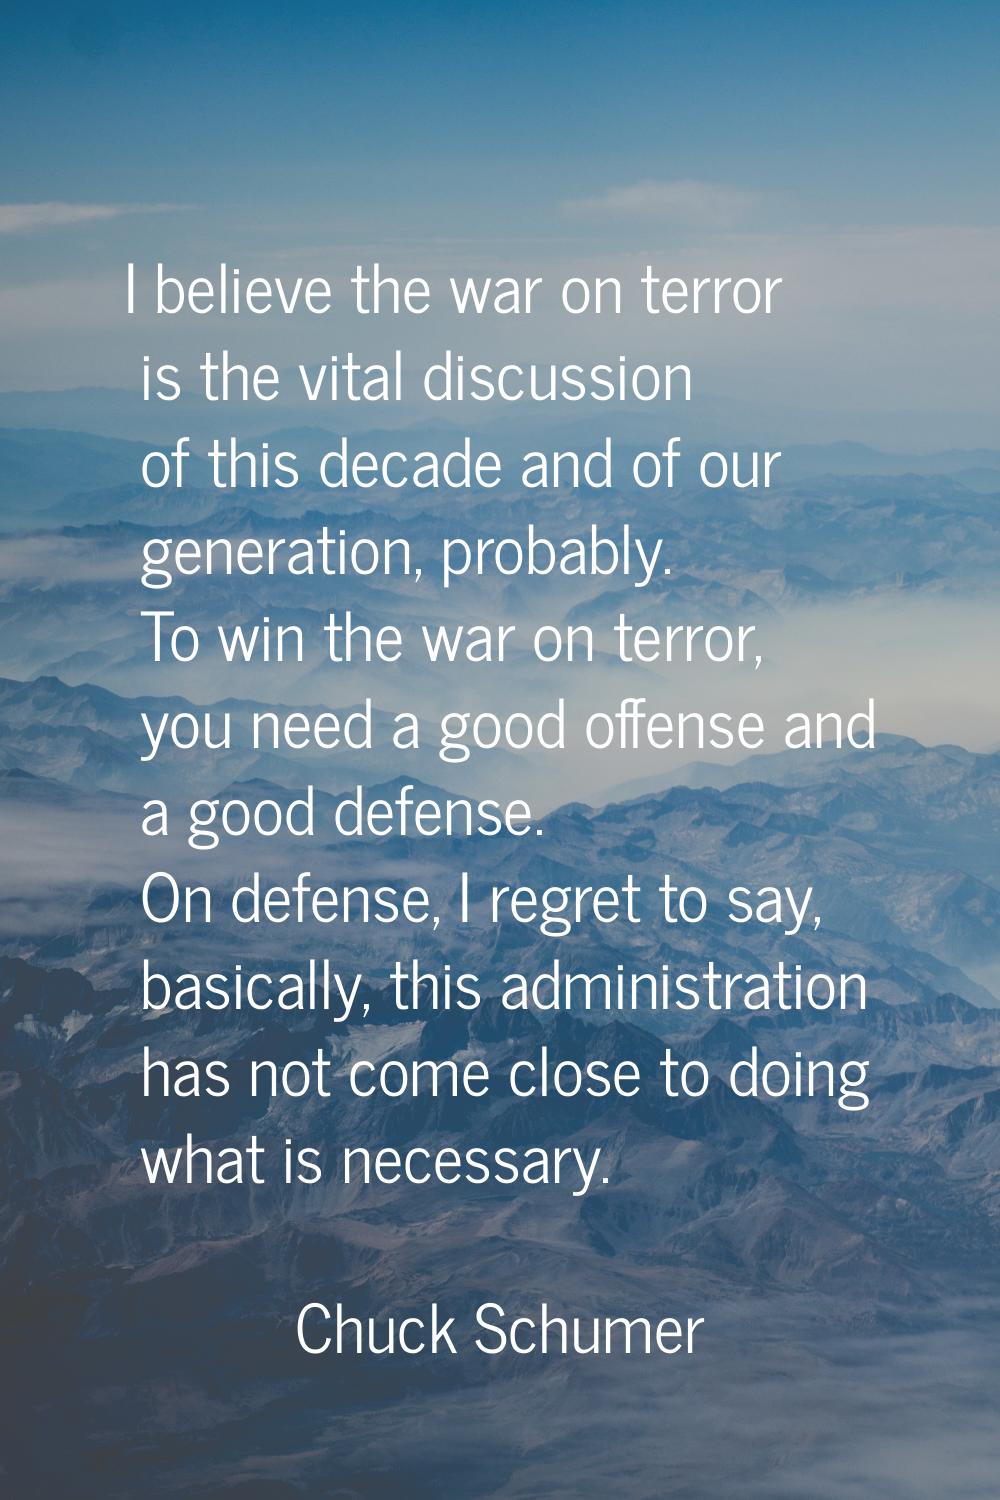 I believe the war on terror is the vital discussion of this decade and of our generation, probably.